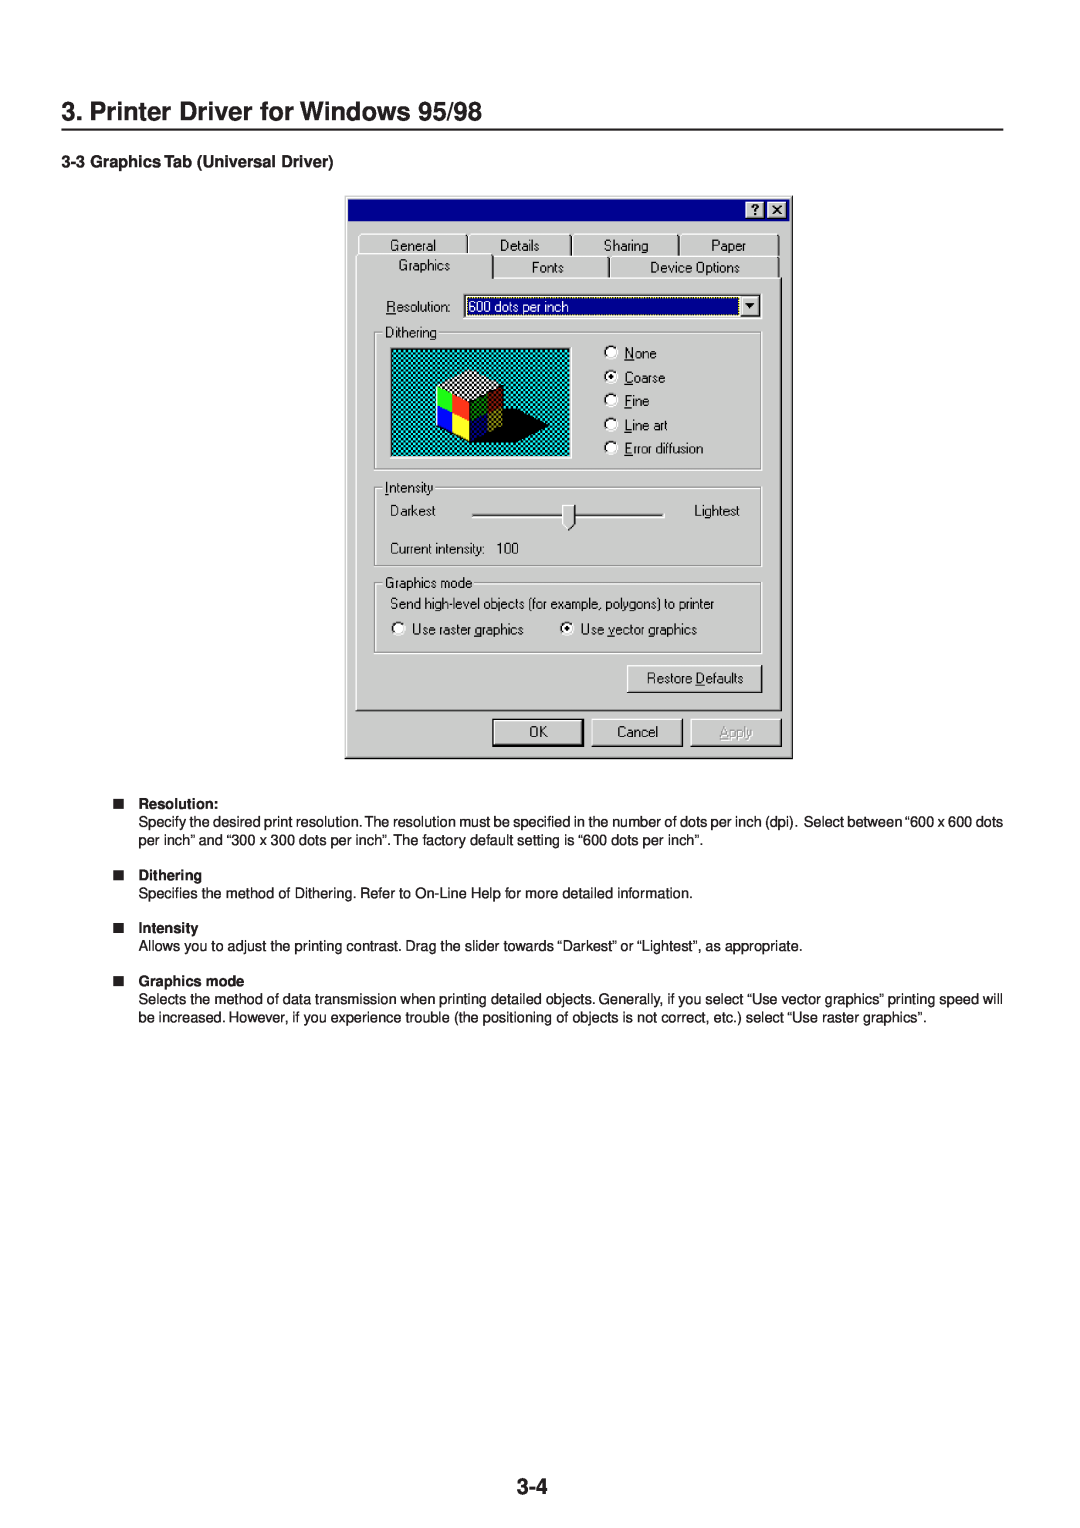 IBM Printing System Printer Driver for Windows 95/98, Graphics Tab Universal Driver, Resolution, Dithering, Intensity 